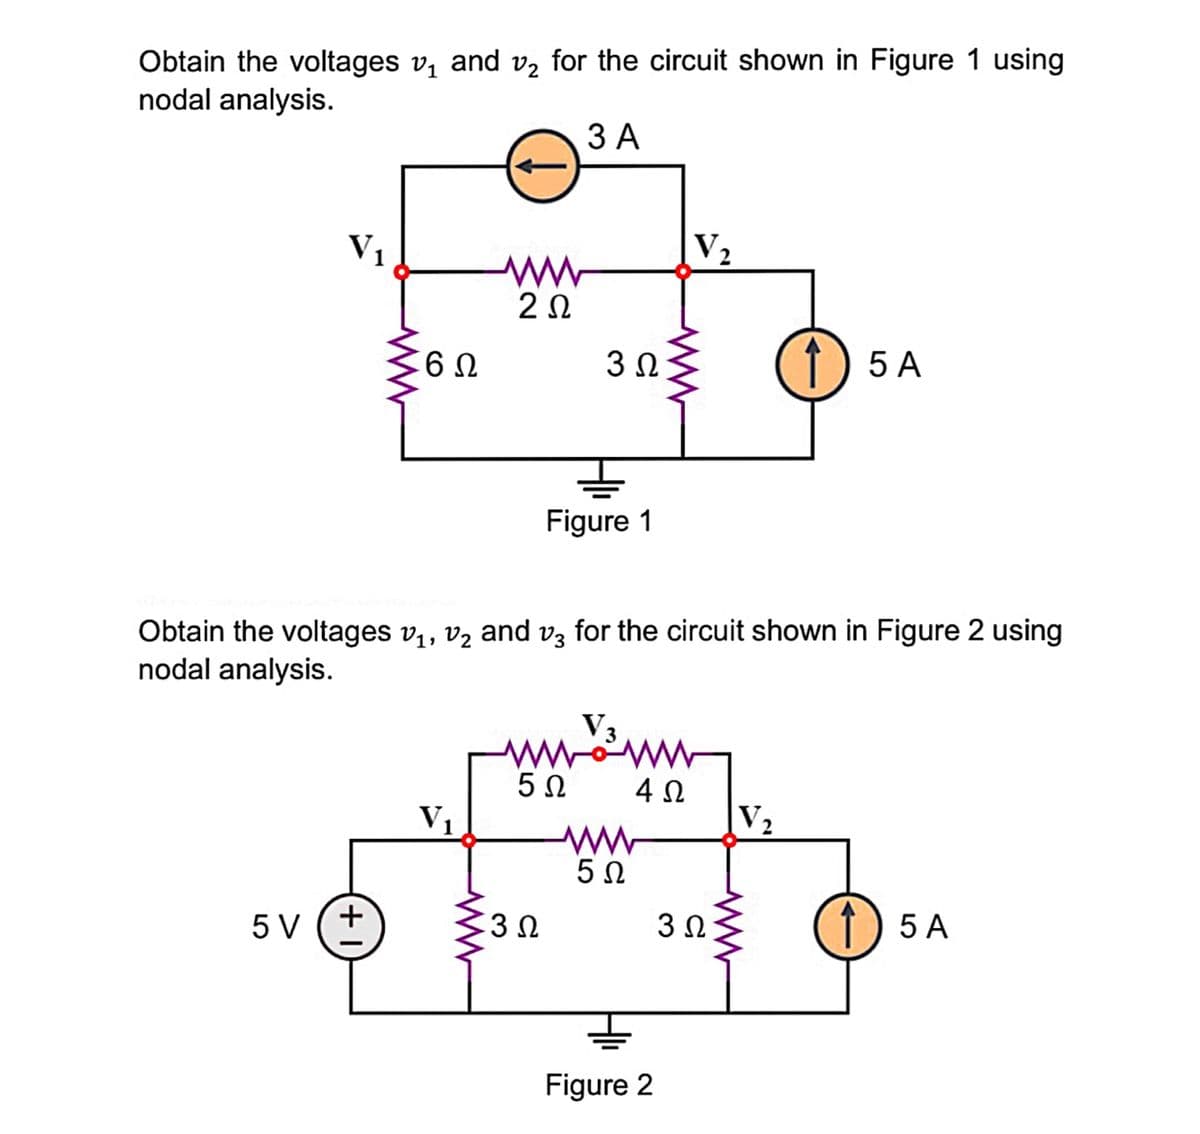 Obtain the voltages v, and v2 for the circuit shown in Figure 1 using
nodal analysis.
ЗА
V1
V2
3 0
1) 5 A
Figure 1
Obtain the voltages v,, vz and v3 for the circuit shown in Figure 2 using
nodal analysis.
V3
ww
5Ω
V1
V2
5 N
5 V (+
3Ω
3Ω
1) 5 A
Figure 2
ww
